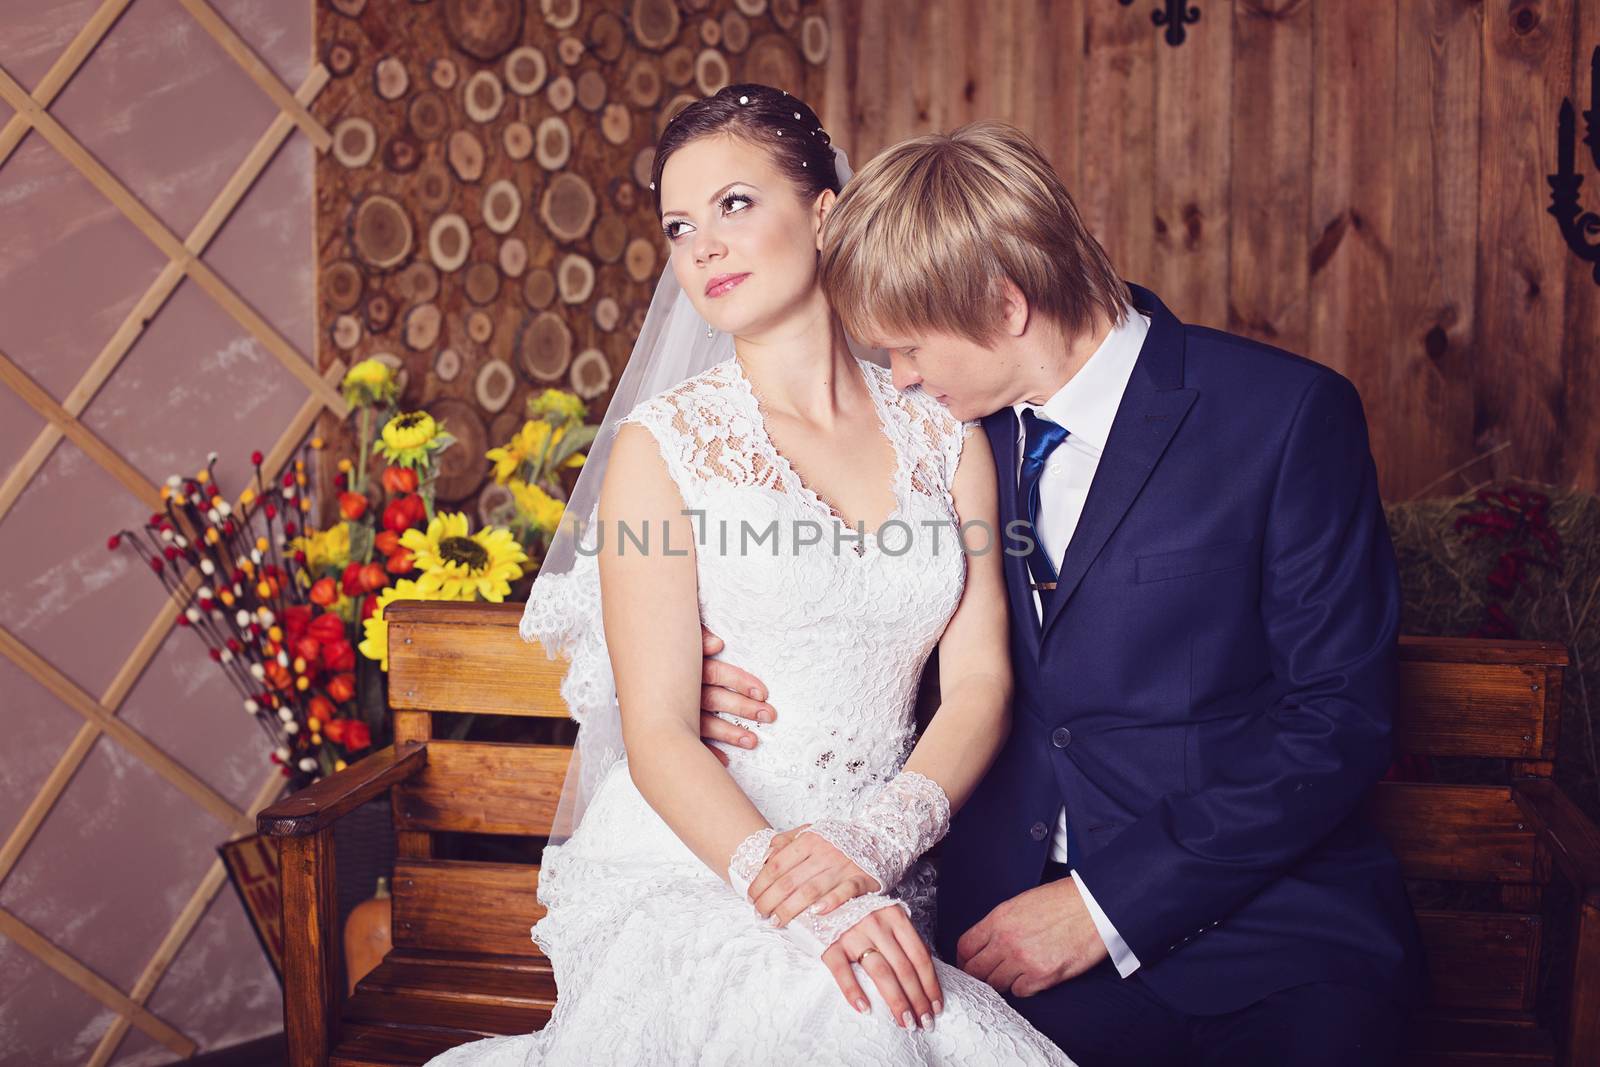 Bride and groom sitting on a bench in studio with vintage interior. Photo of happy newlyweds